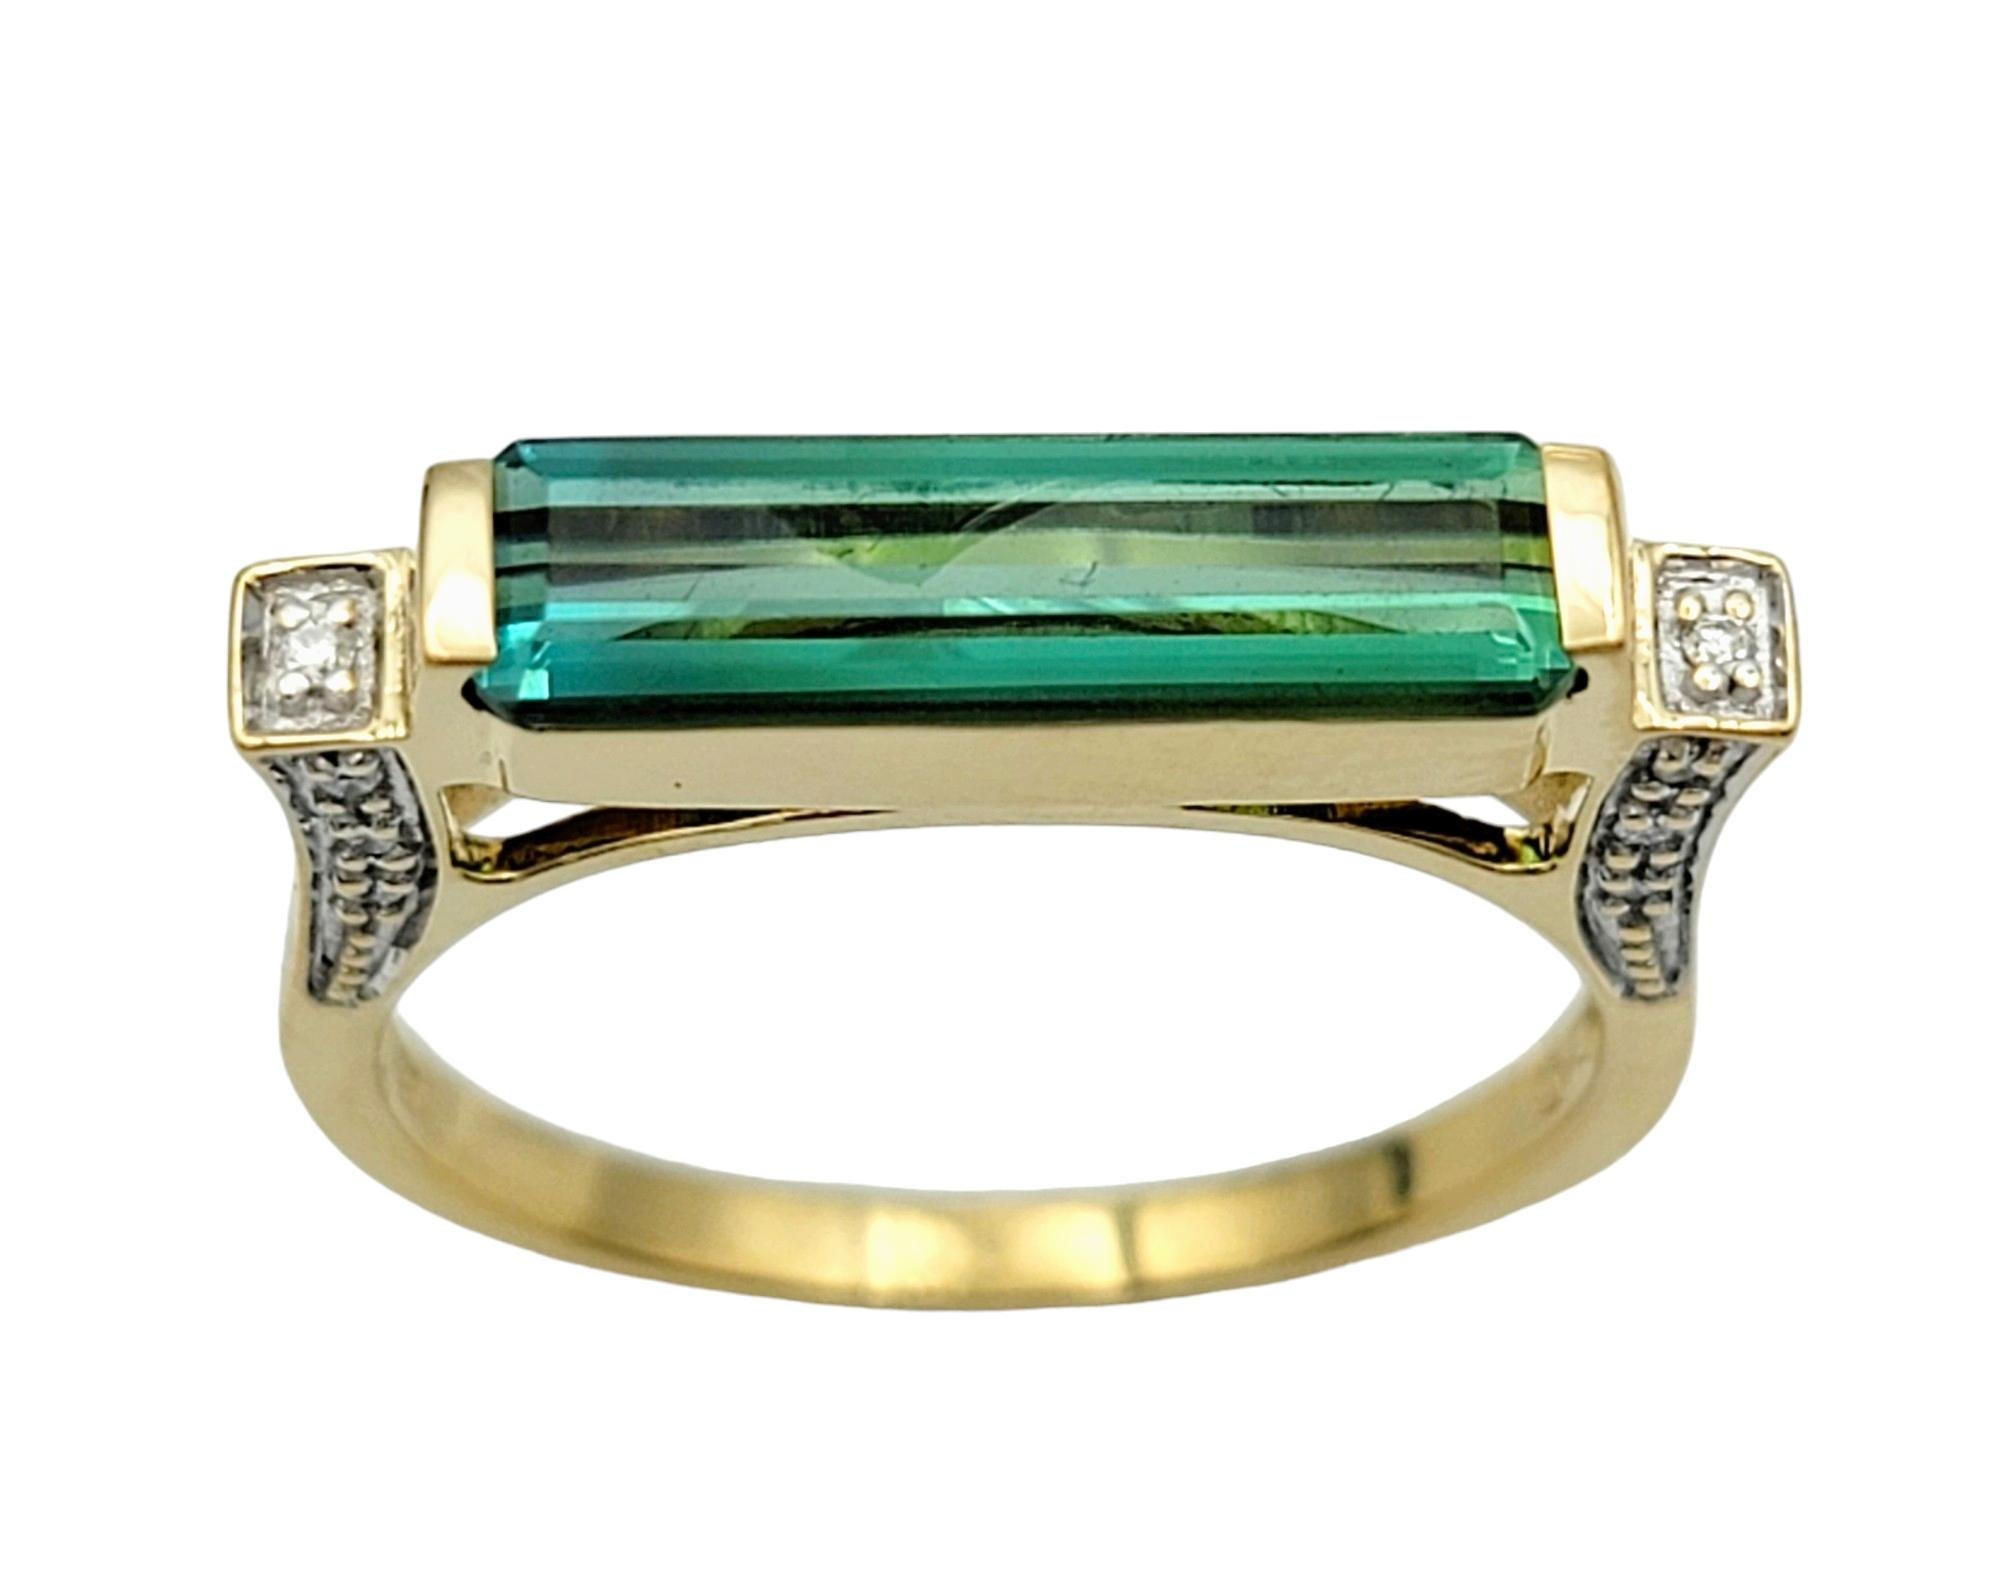 Ring Size: 6.75

This band ring exudes modern elegance with its rectangular-cut green tourmaline centerpiece, set in warm 18 karat yellow gold. Flanked on either side by round diamonds, the tourmaline captures attention with its vibrant green hue,